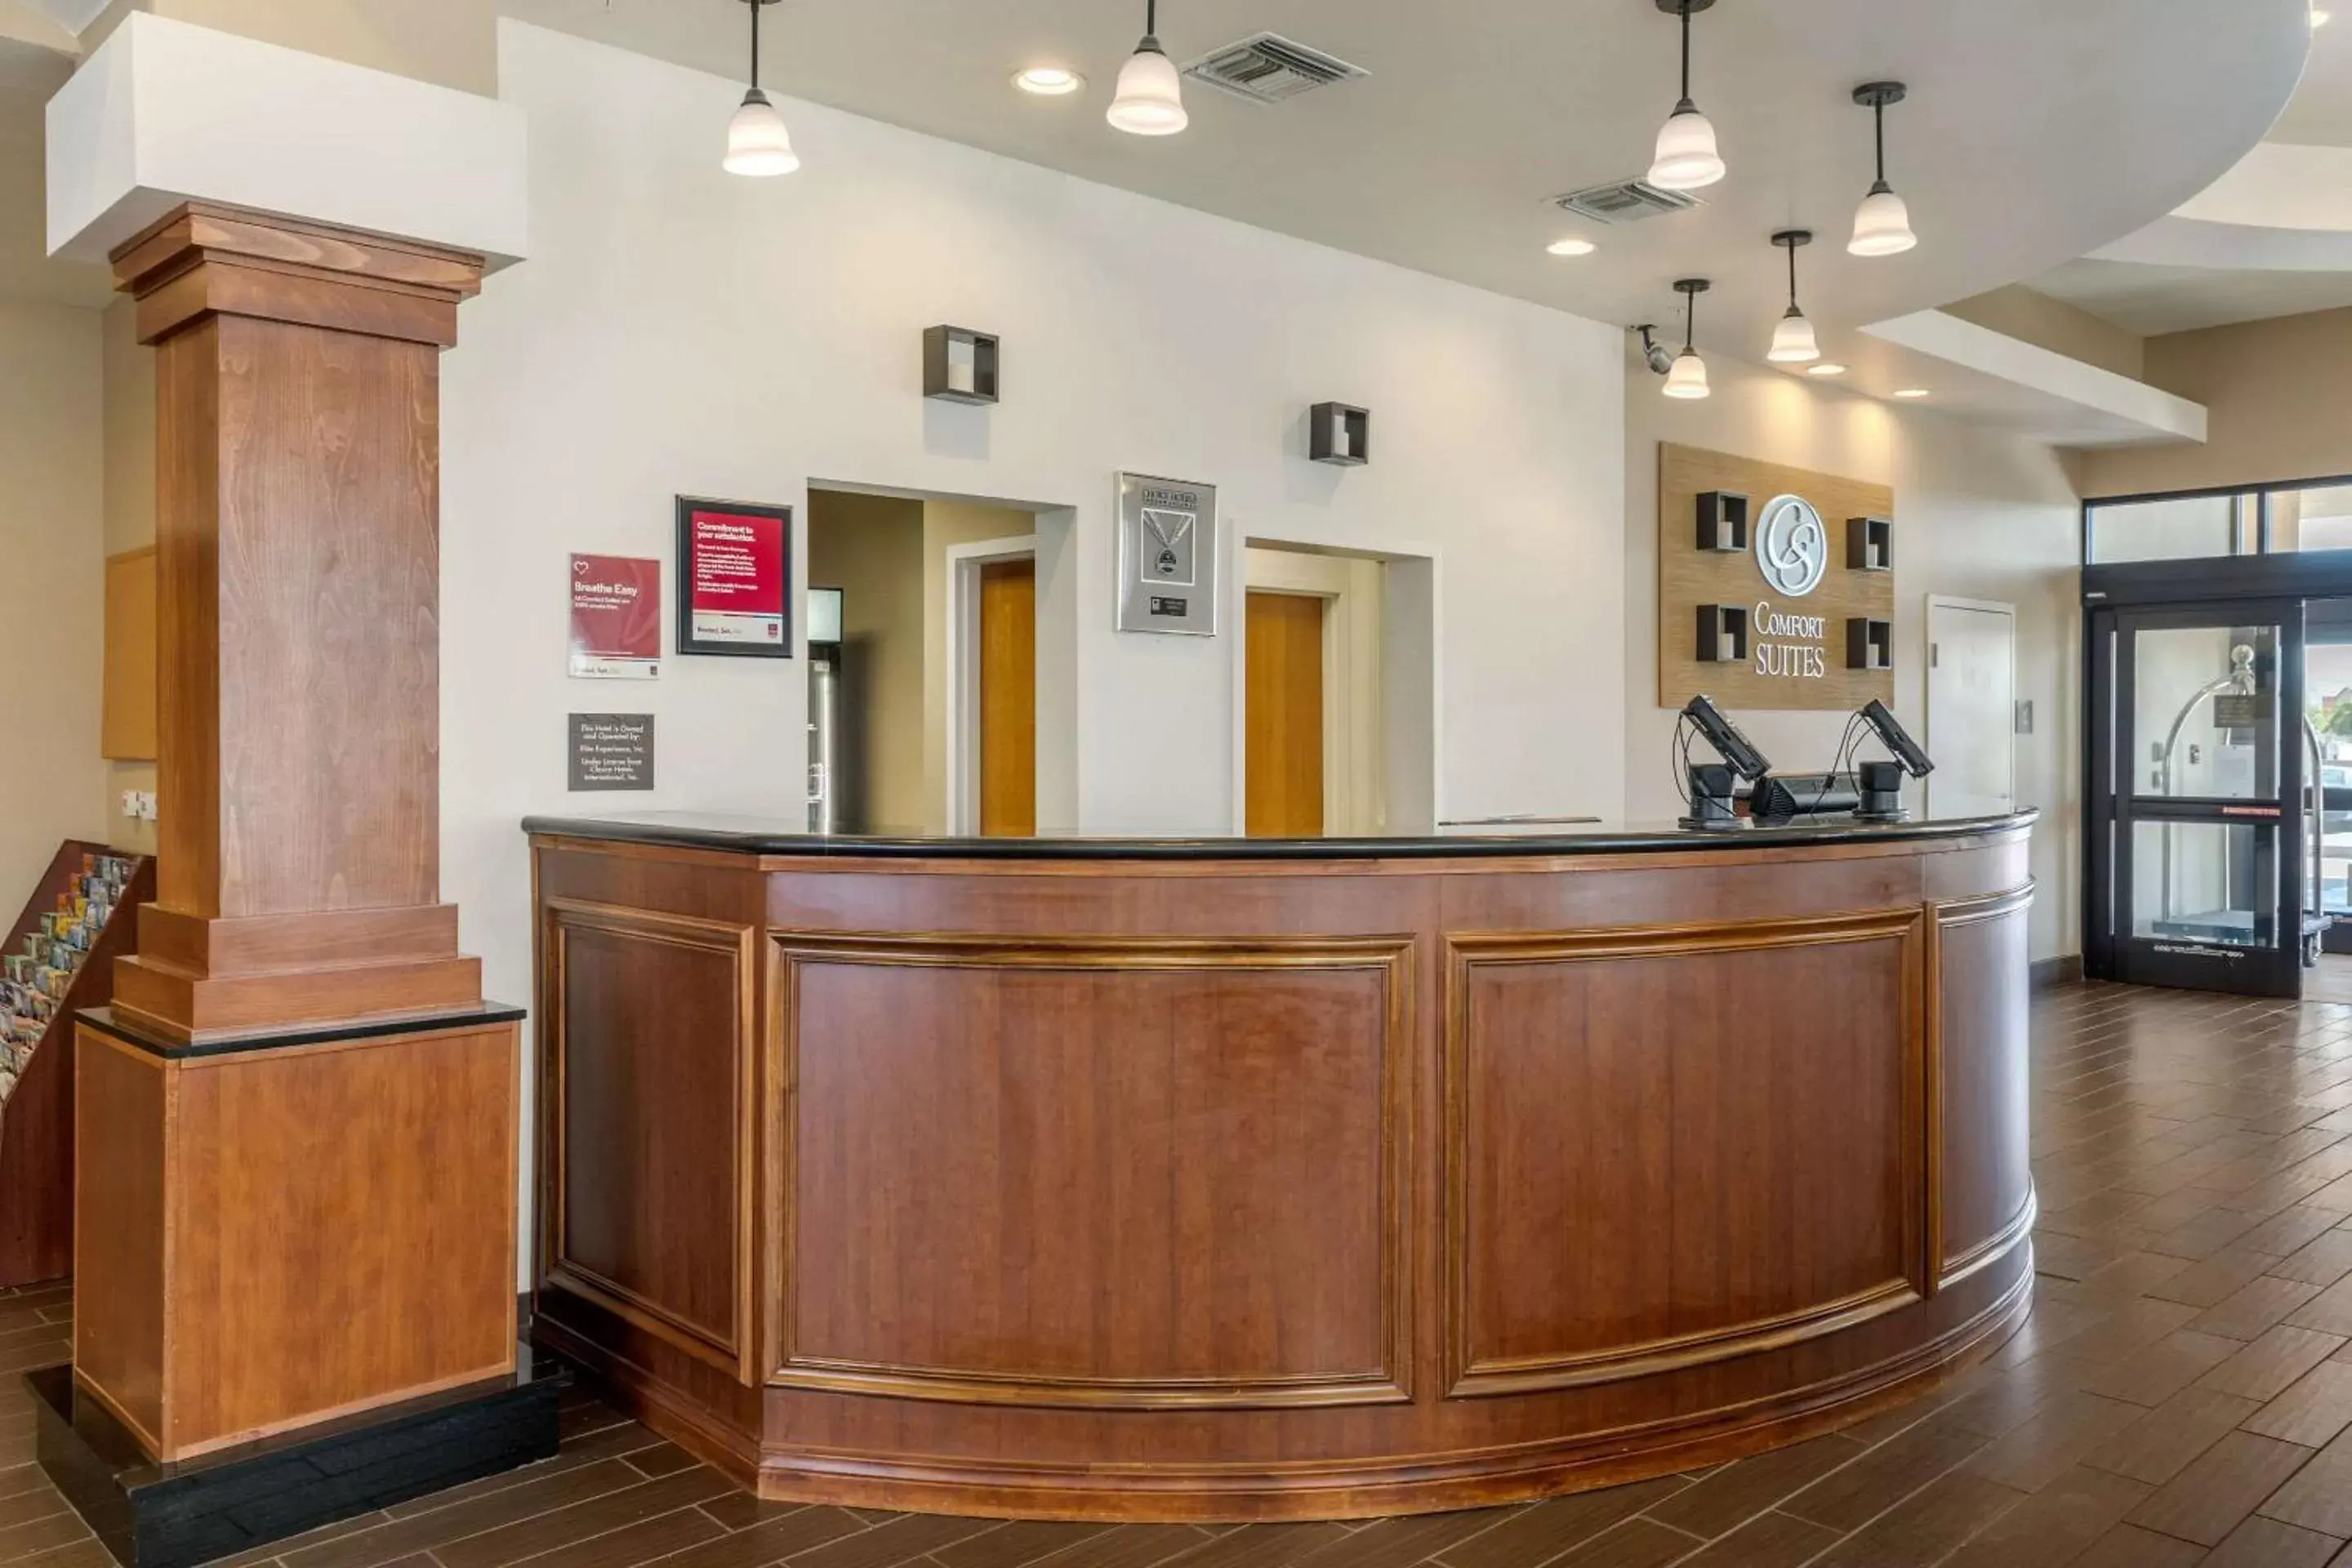 On-site shops, Lobby/Reception in Comfort Suites Barstow near I-15